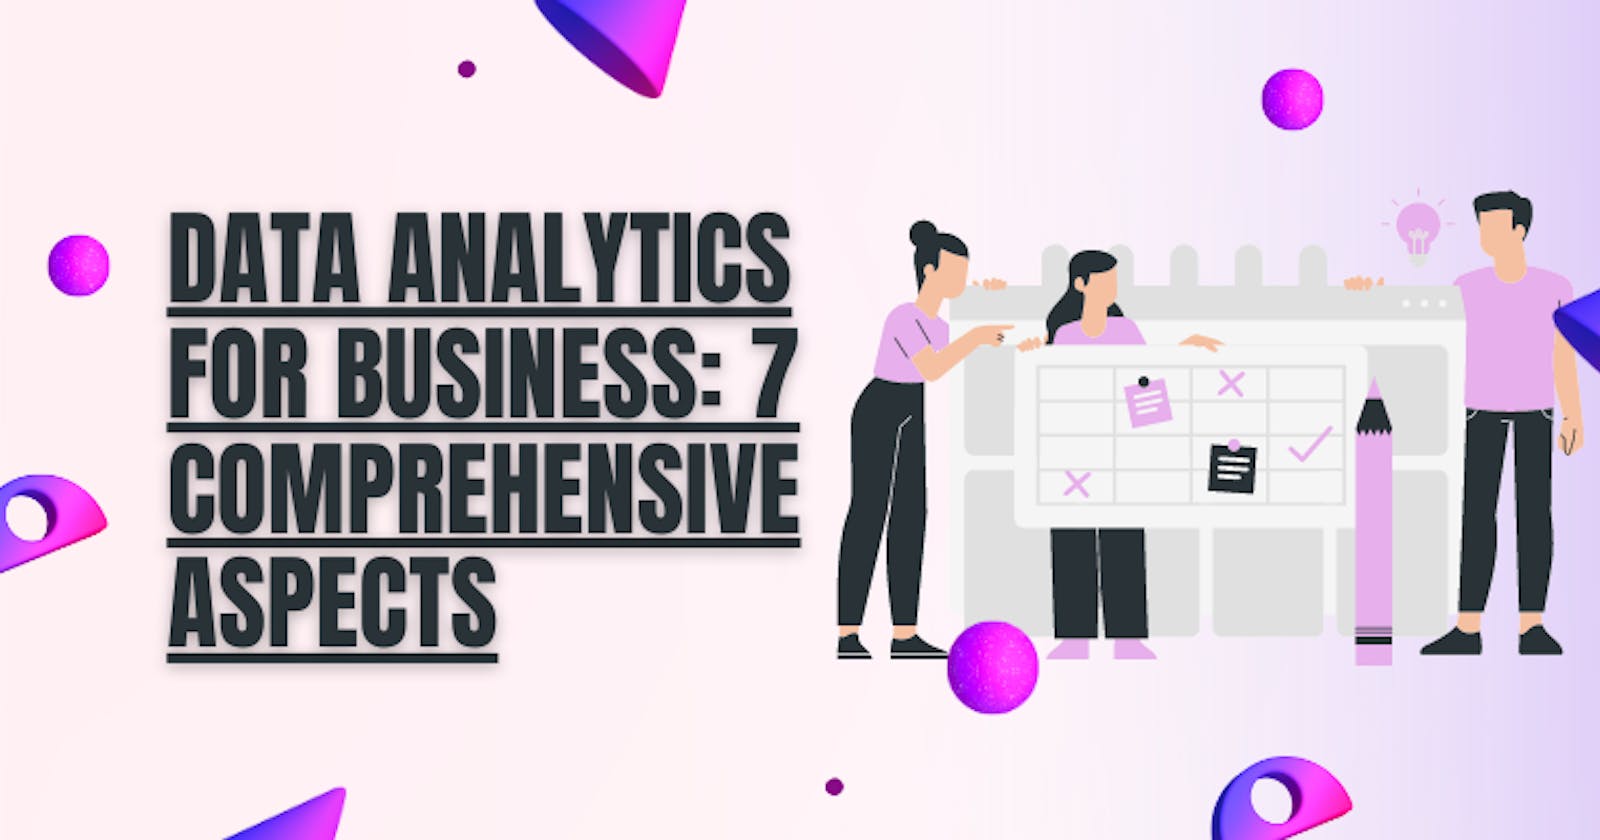 Data Analytics for Business: 7 Comprehensive Aspects